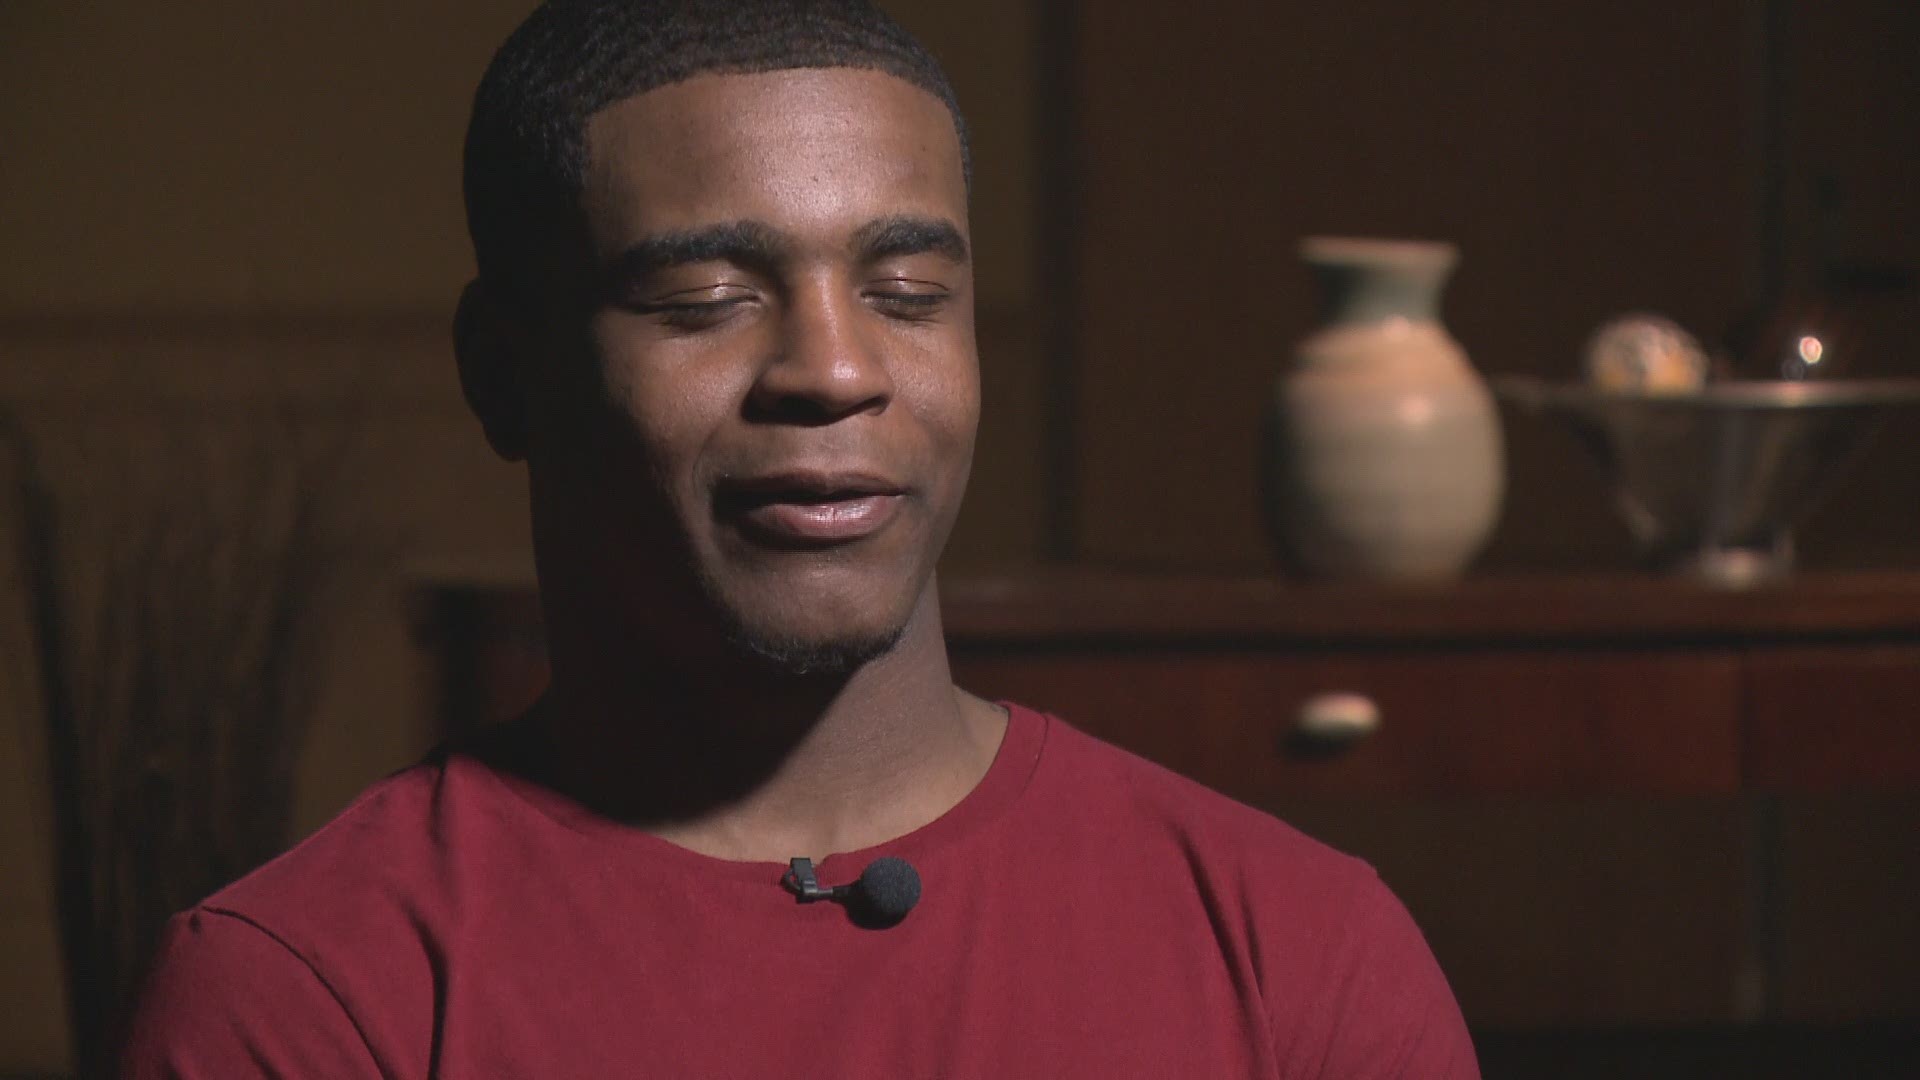 Extended interview with Texas Tech student and Little Rock native, Braylan Campbell.